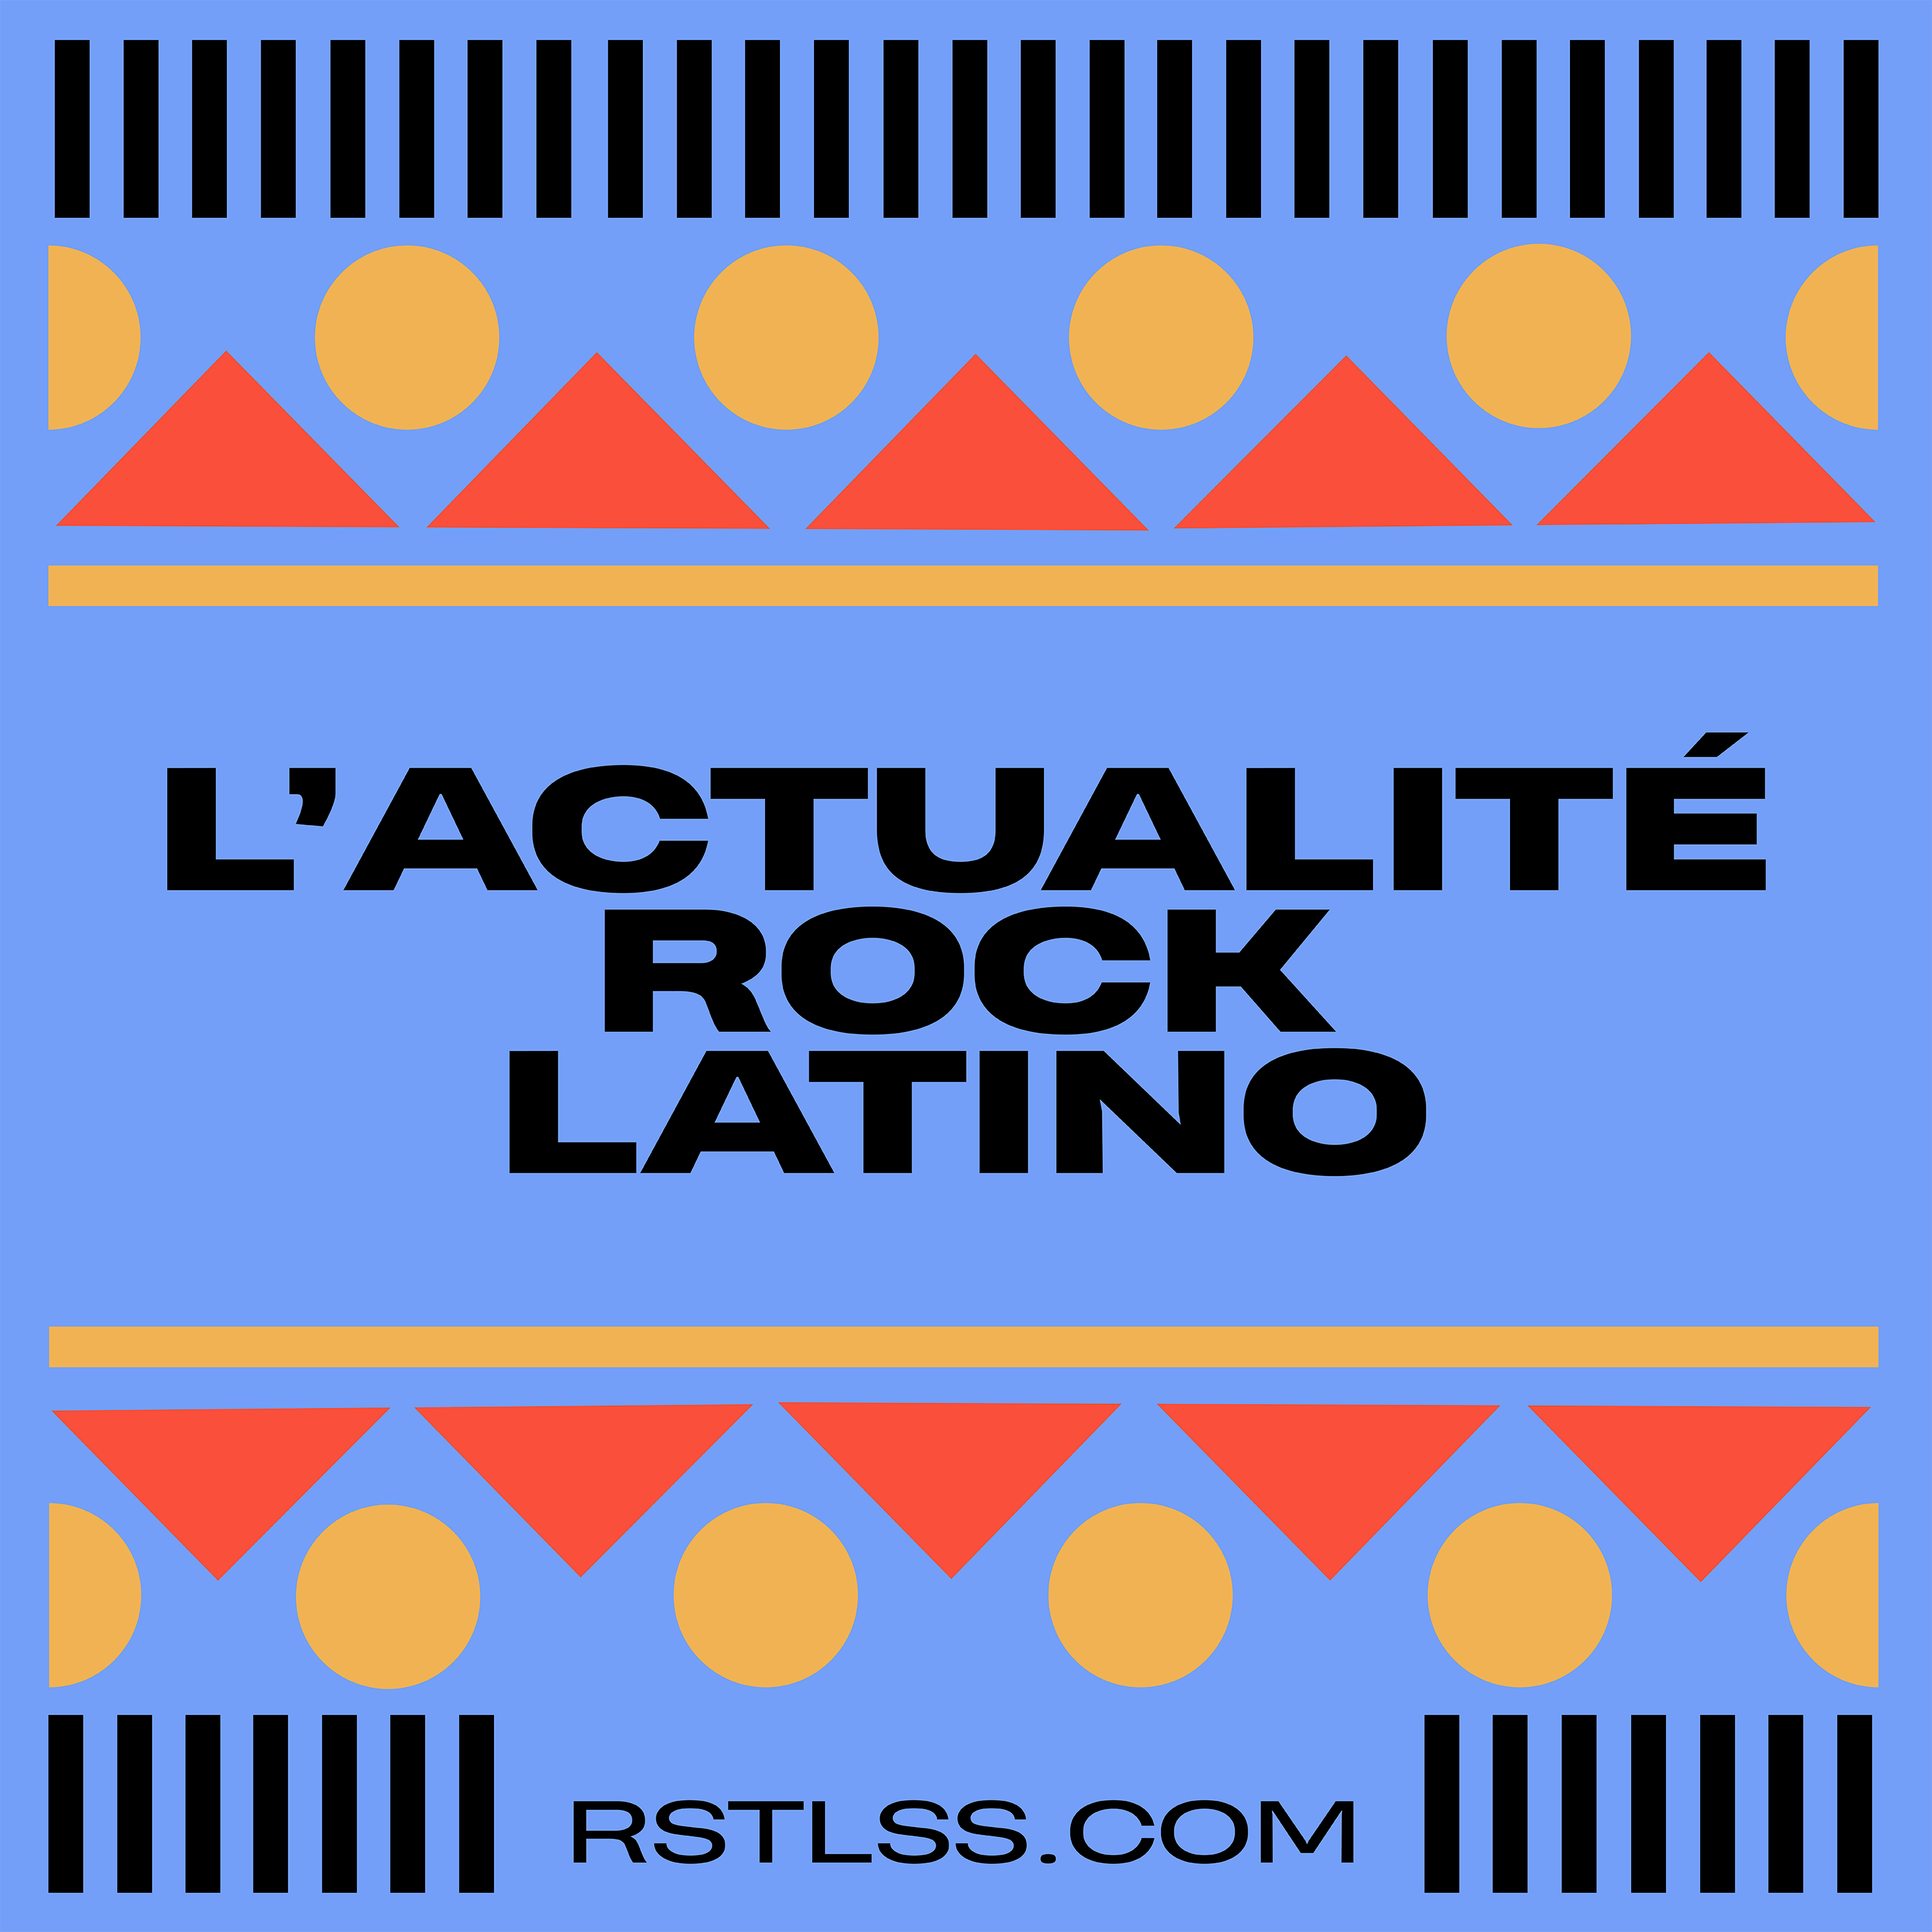 L’ACTUALITÉ ROCK LATINO #8 - Axty "Roses For You"